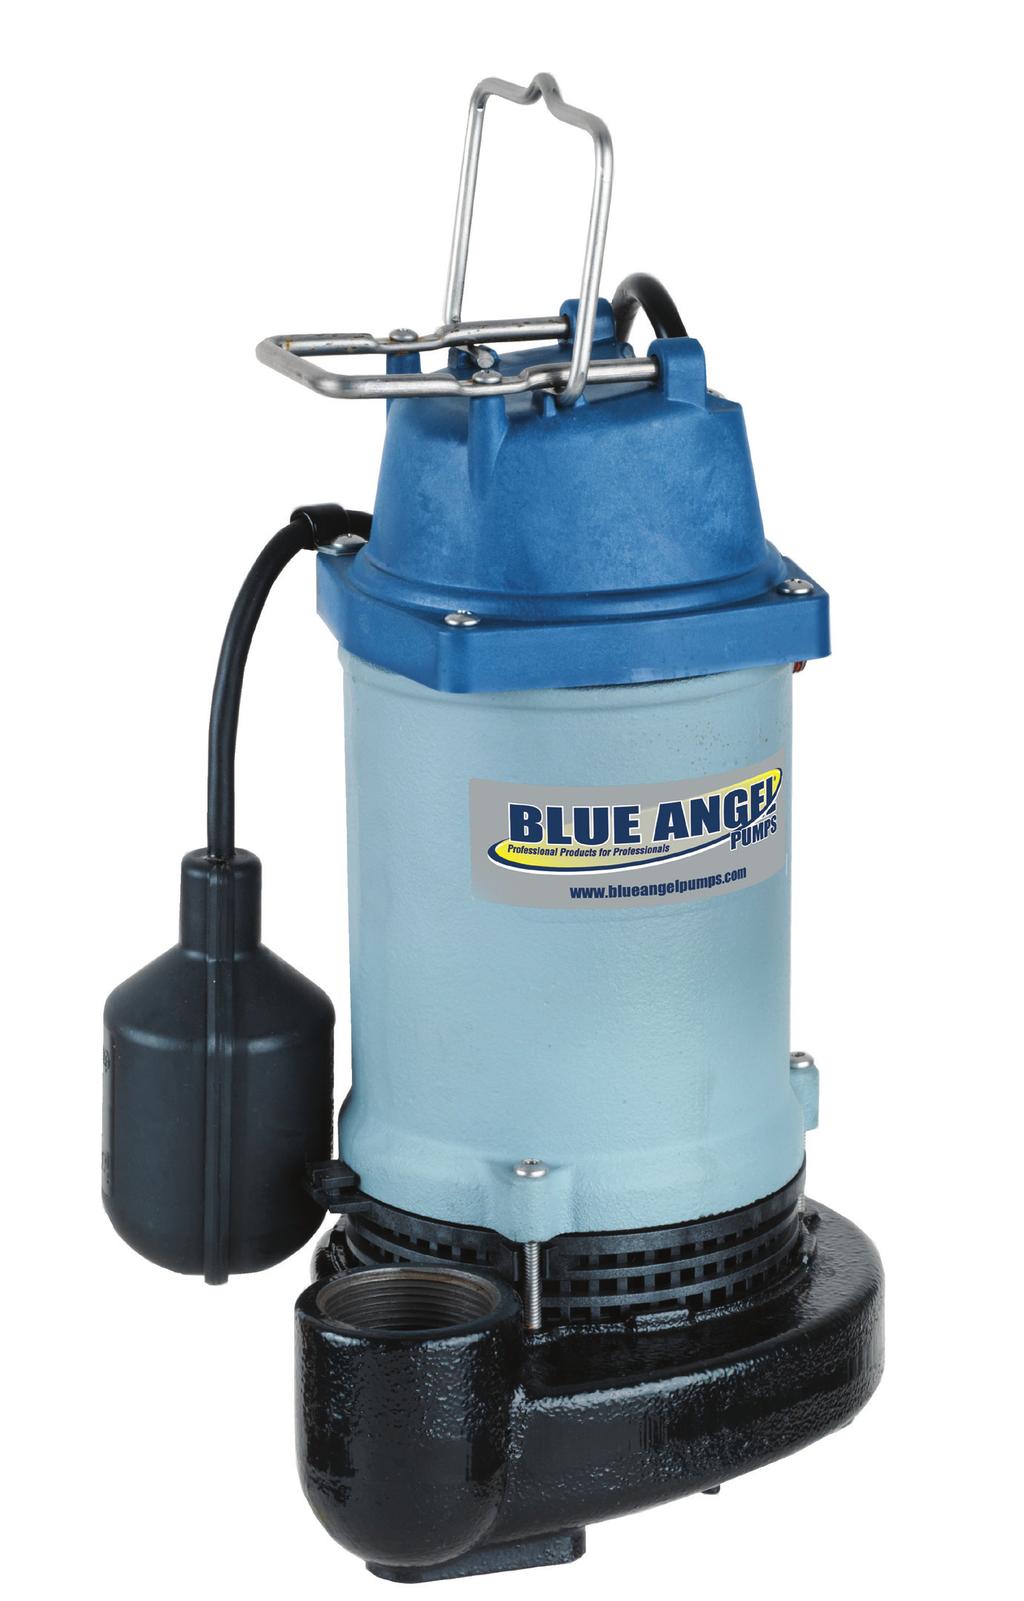 EFFLUENT SUBMERSIBLE CAST IRON EFFLUENT PUMP MODEL T7DSE, 1/2 HP MODEL TDSE, 3/4 HP EFFLUENT All Cast Iron Construction and Dual Suction Design to Eliminate Clogging TDSE ½ HP Max Flow 87 GPM: 74 GPM